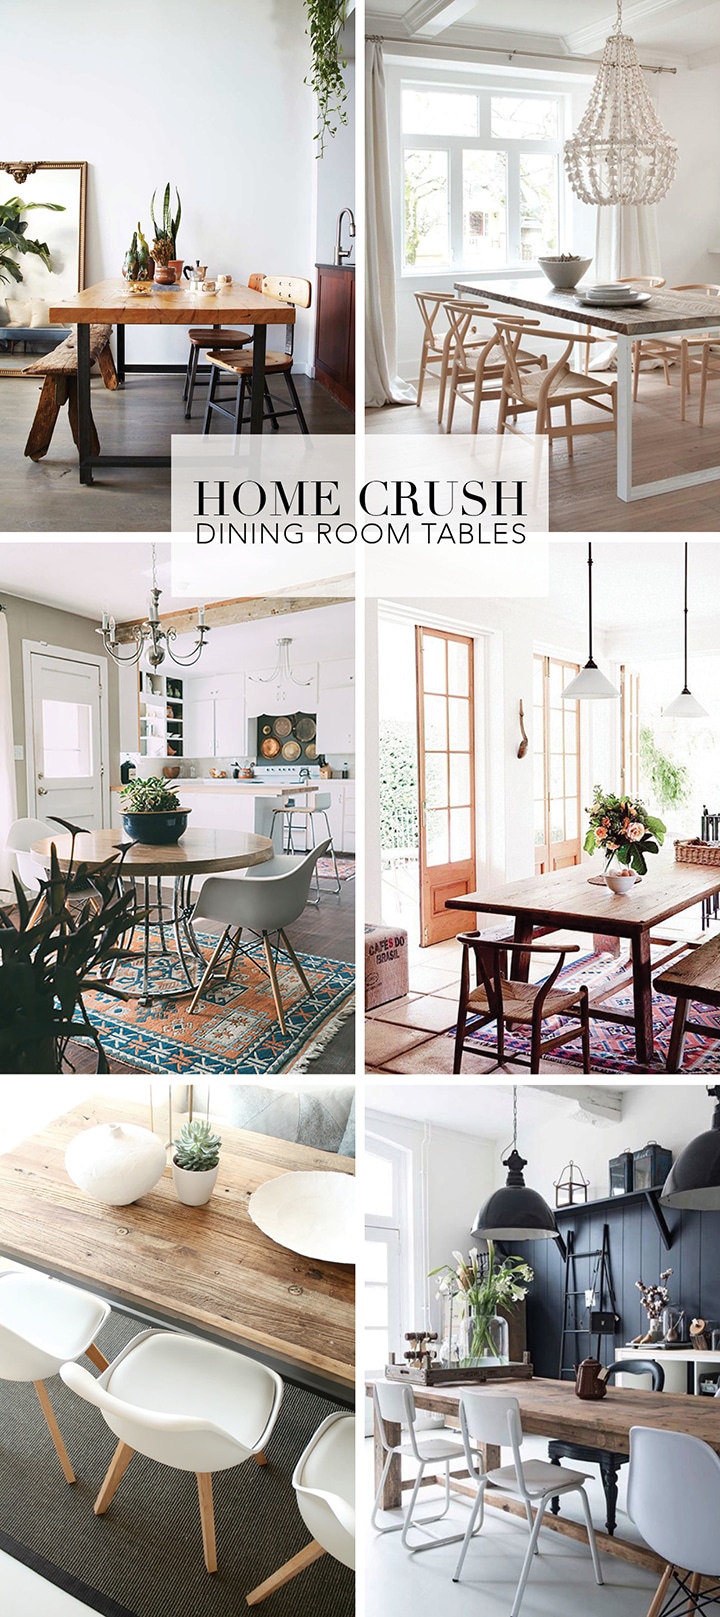 Home Crush – Dining Room Tables